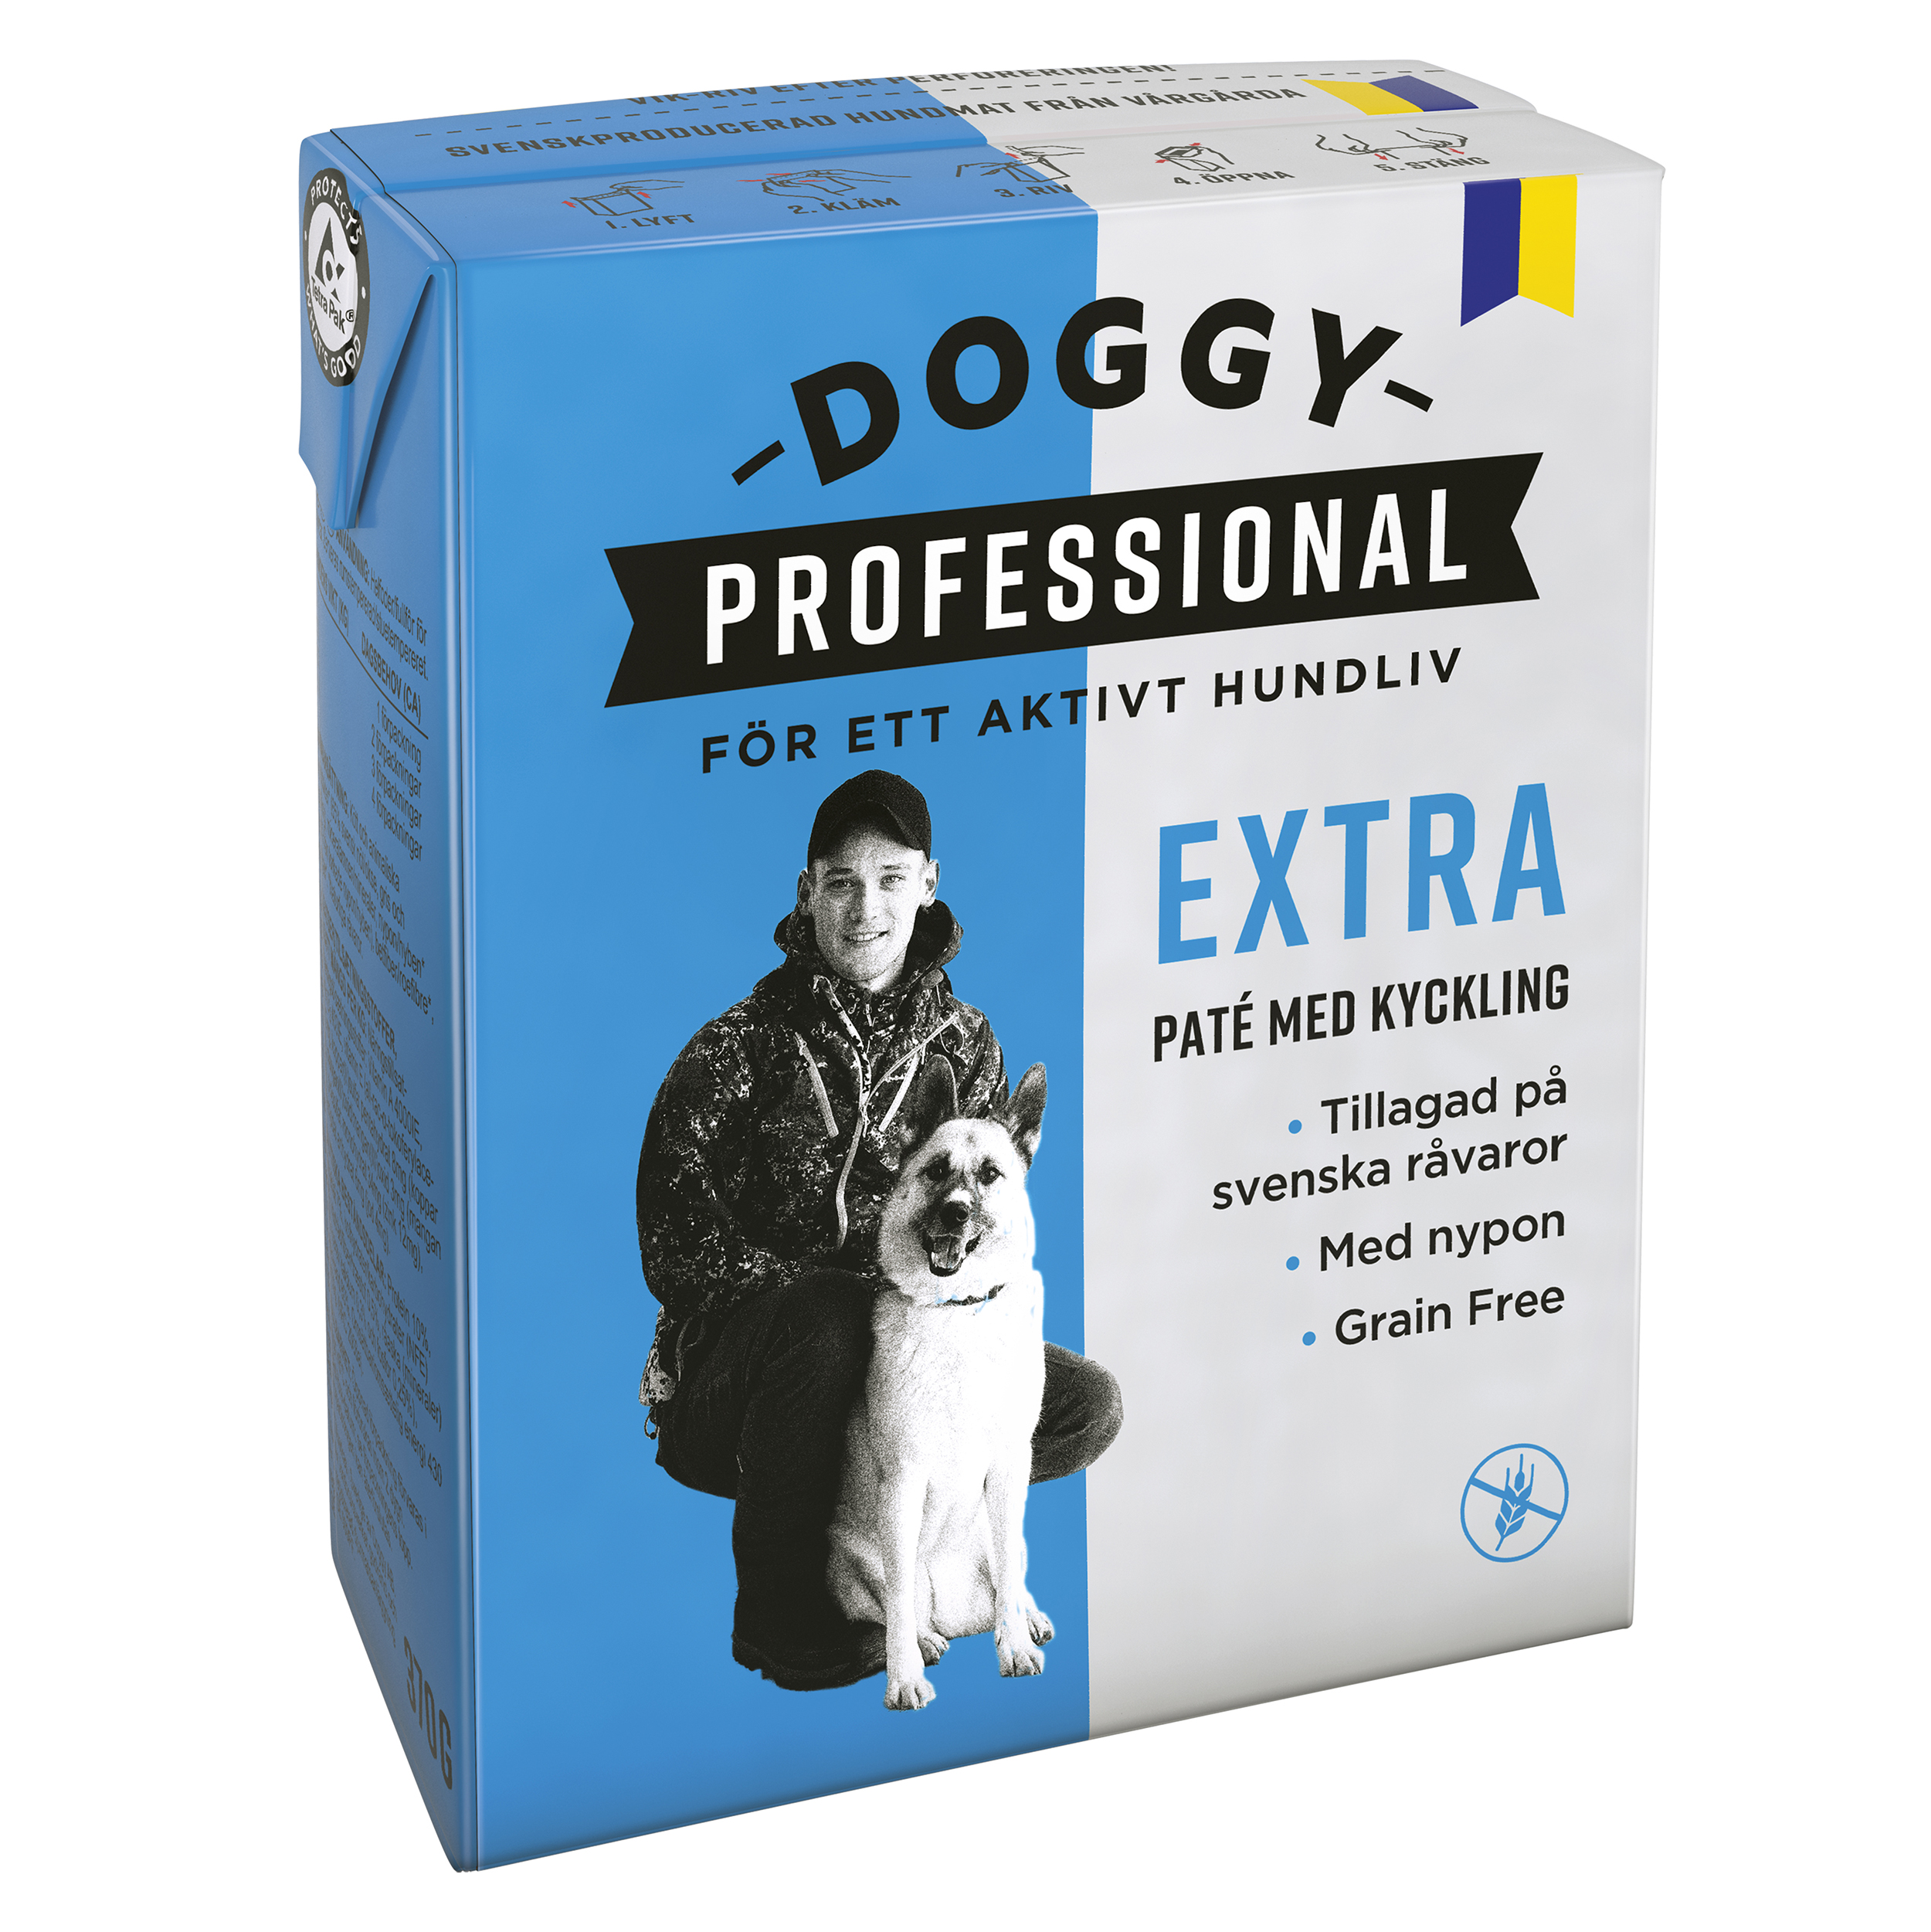 Doggy Professional Extra 370g